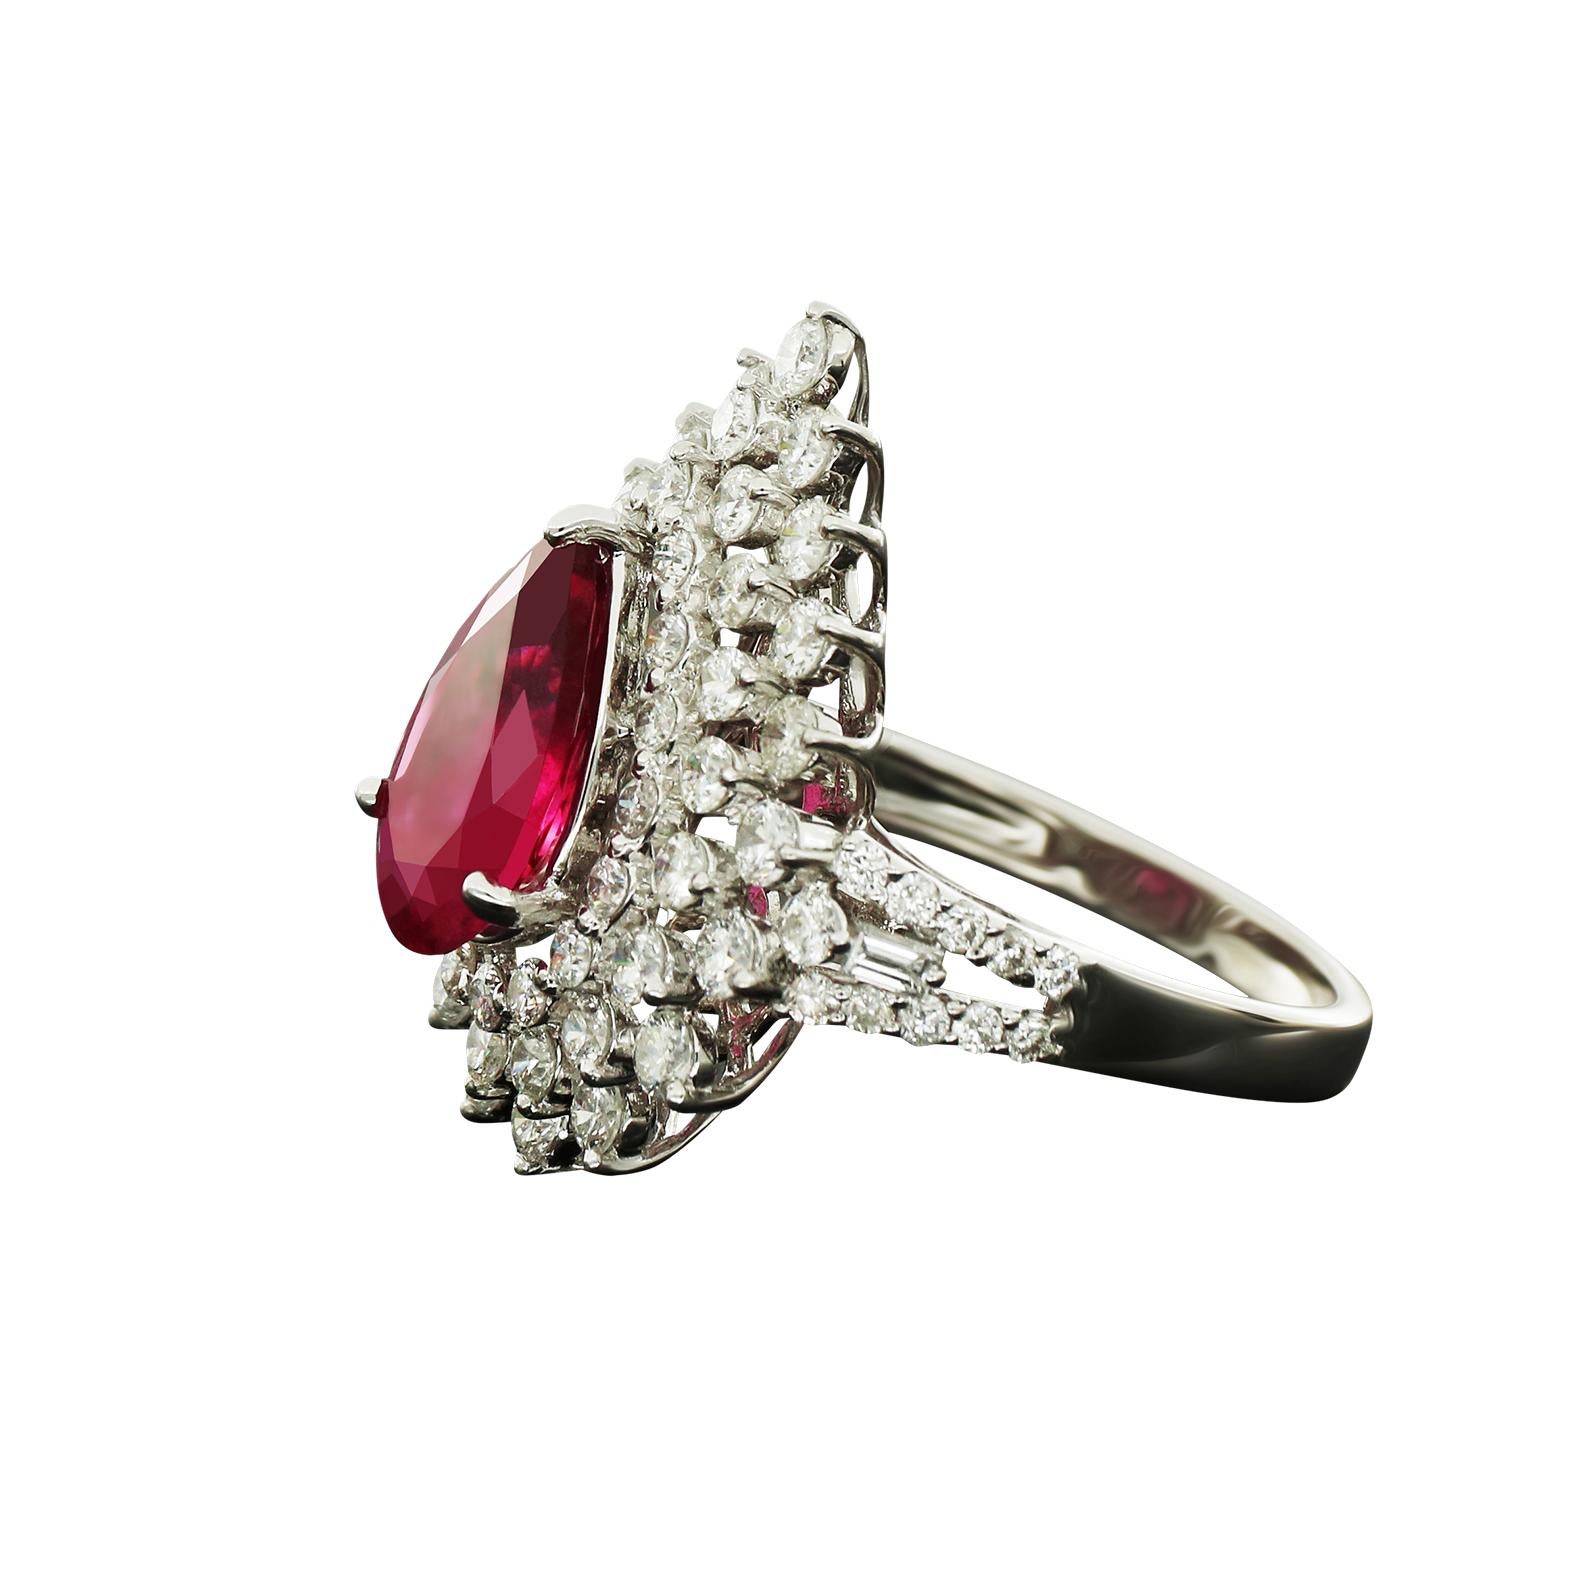 Gorgeous White Gold 18K Ring by Amwaj Jewelry with Ruby and round shape Diamonds. At the center there is a breathtaking ruby. Surrounding that are round shape Diamonds that are giving the appearance of petals. This amazing Ring is a perfect choice